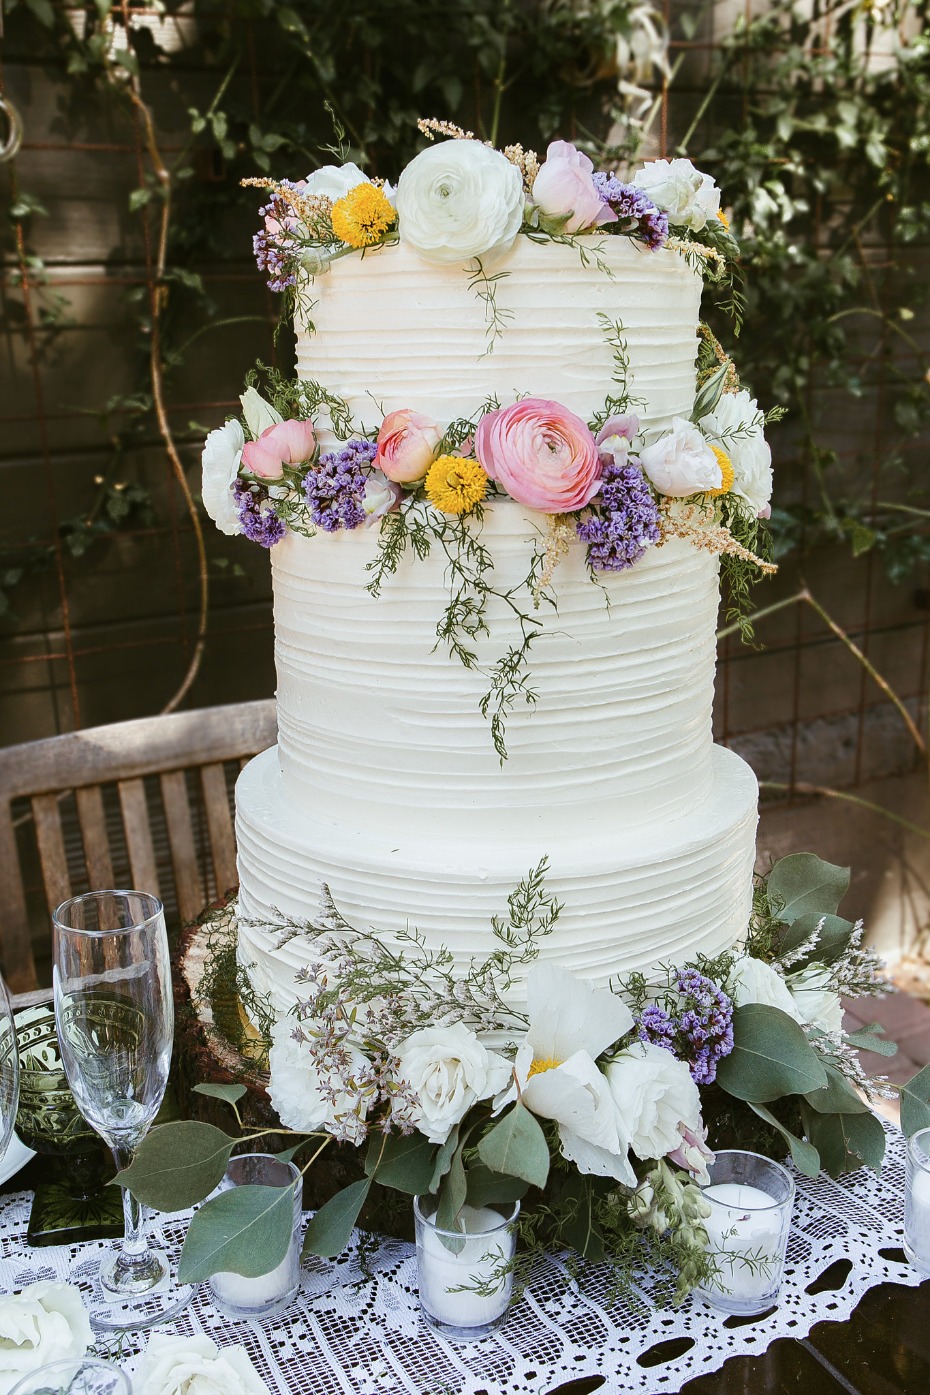 Three-tier cake with florals